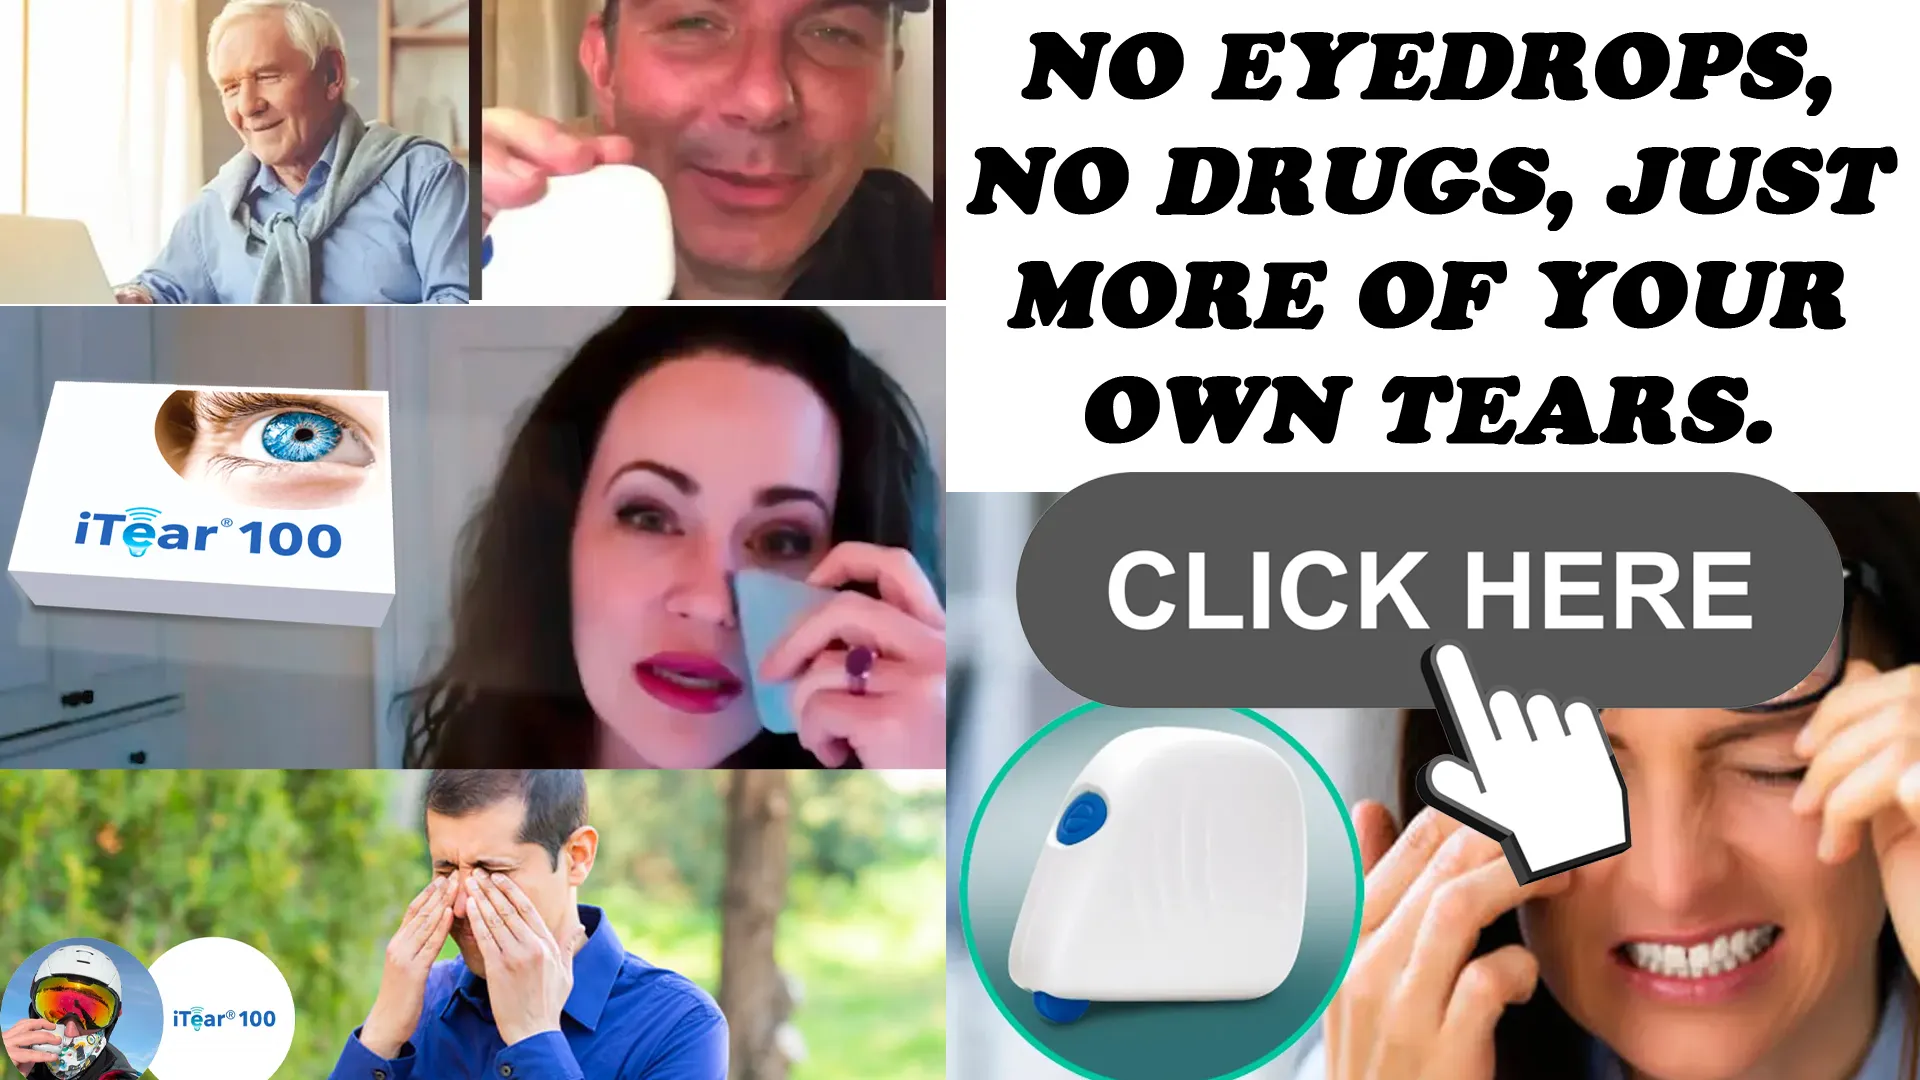  iTear100 Vs. Eye Drops: A Clear Vision for the Future 